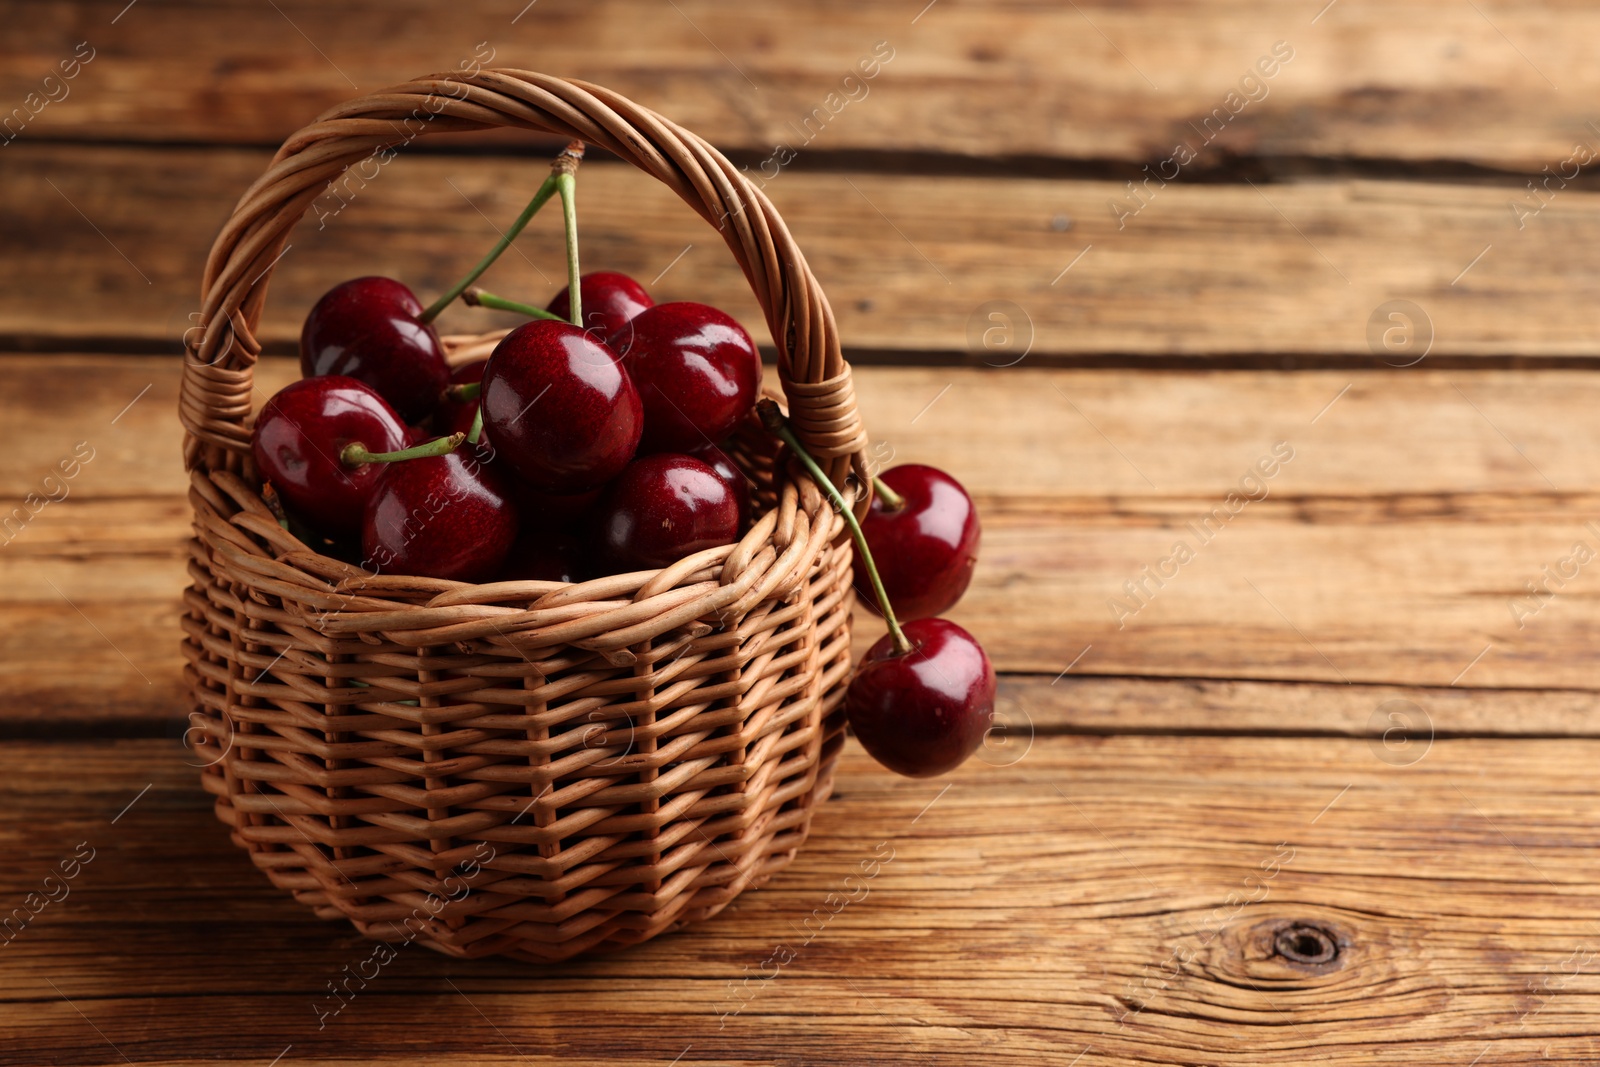 Photo of Wicker basket of ripe sweet cherries on wooden table, space for text